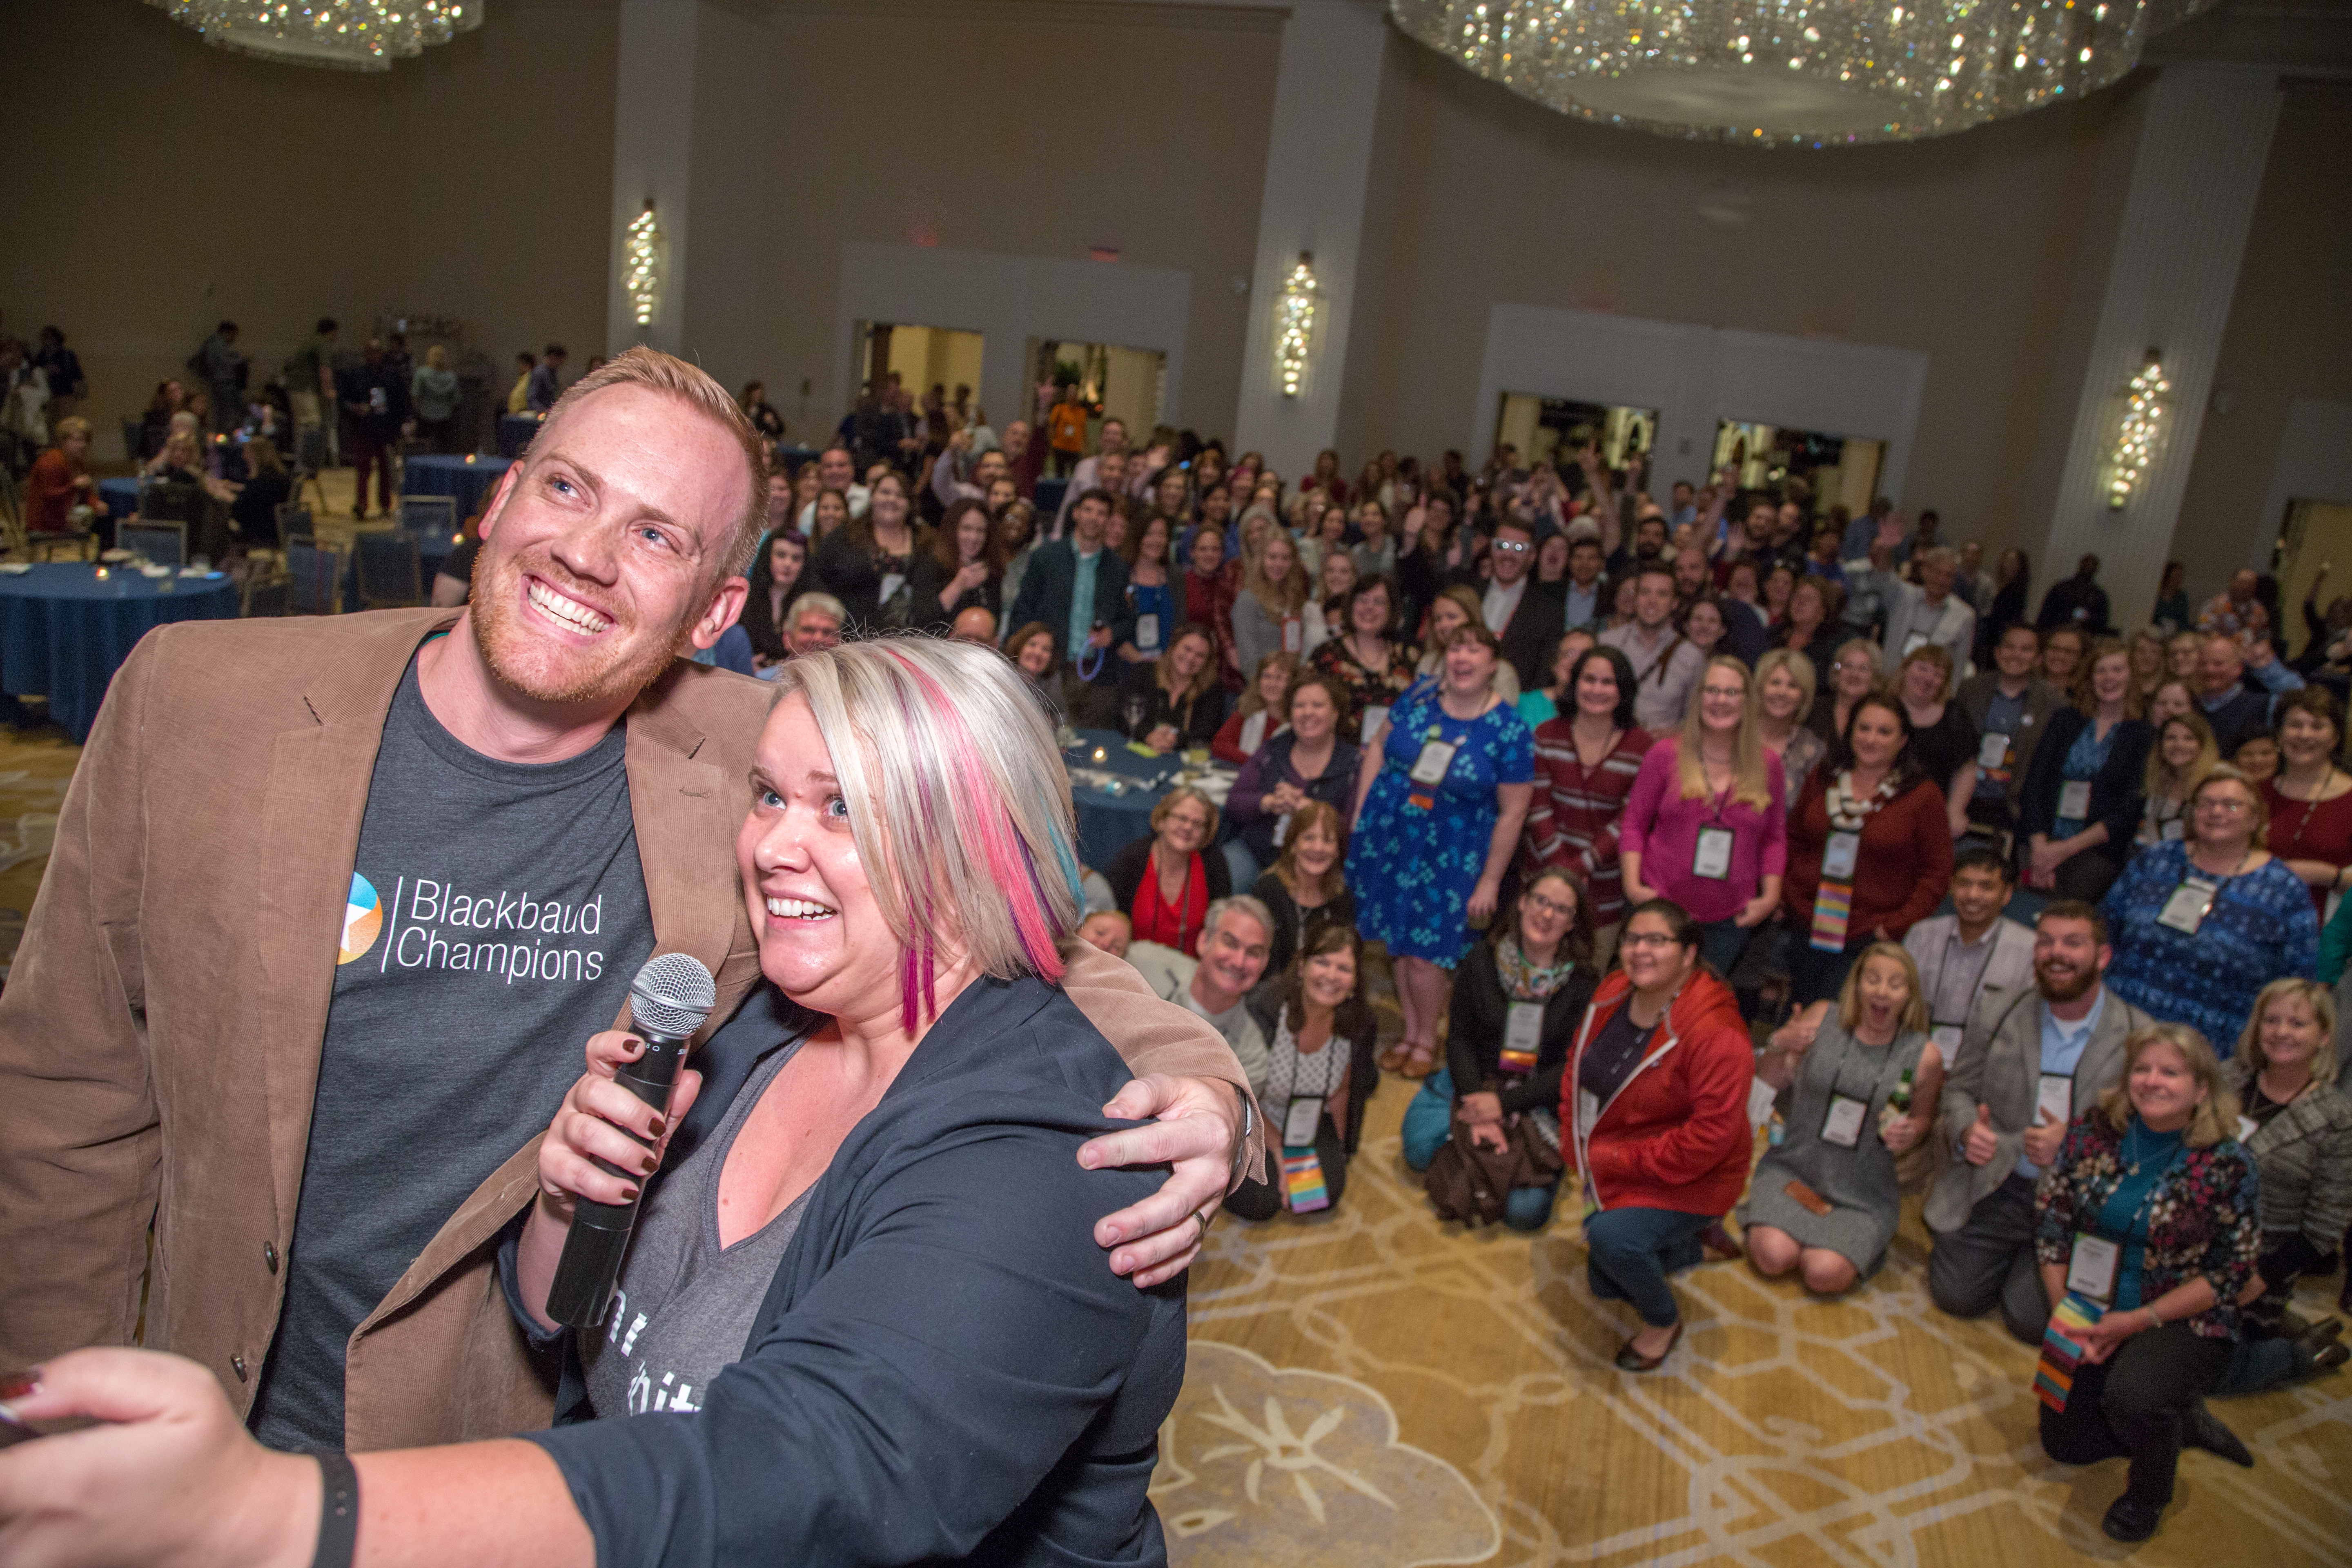 bbcon Reception Photos Now Available for Download! 3002